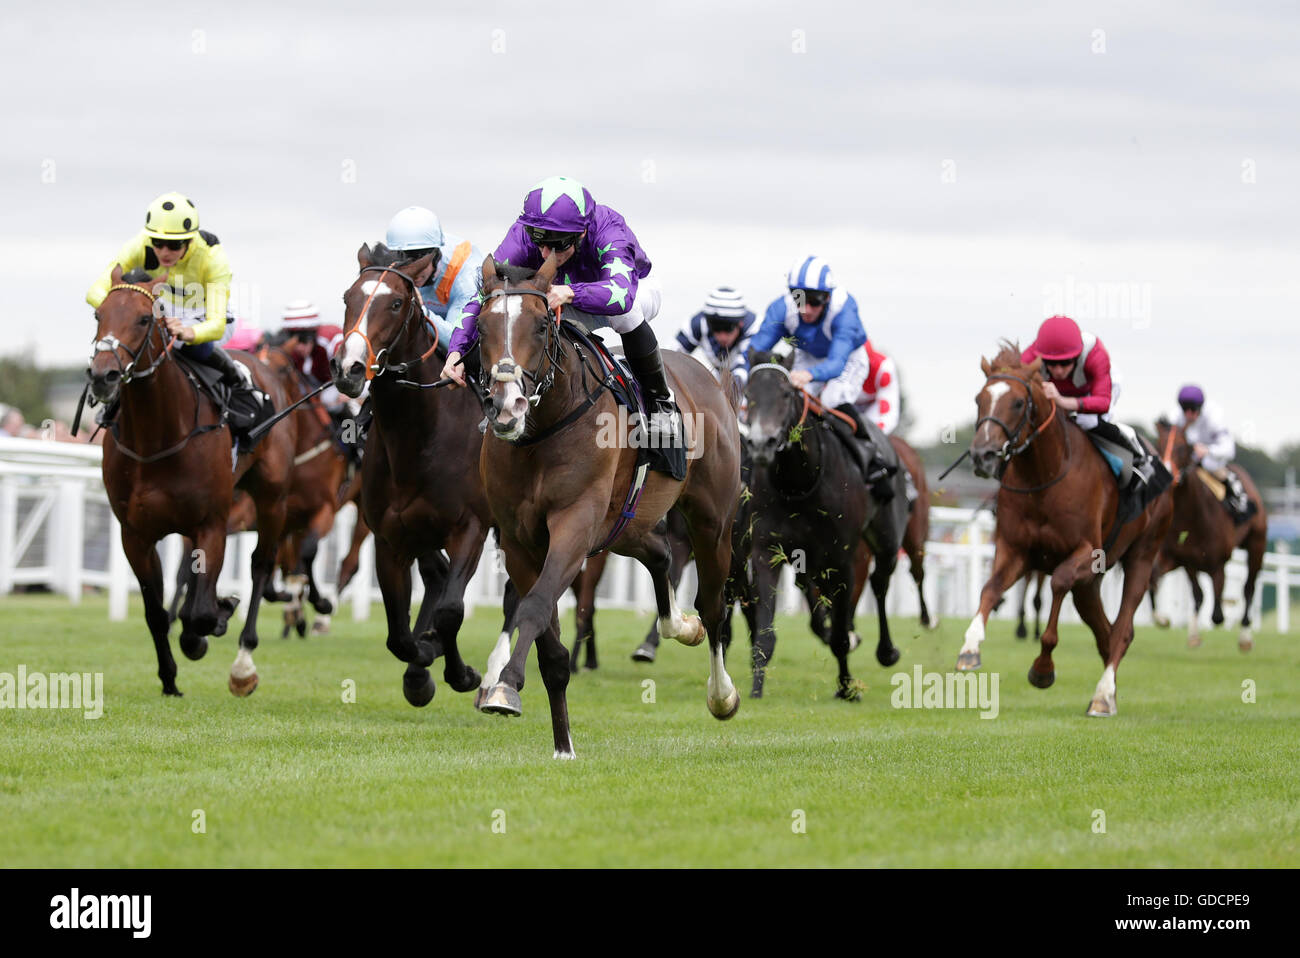 Escobar ridden by James McDonald (centre) wins the Highclere Thoroughbred Racing EBF Stallions Maiden Stakes at Newbury Racecourse. Stock Photo